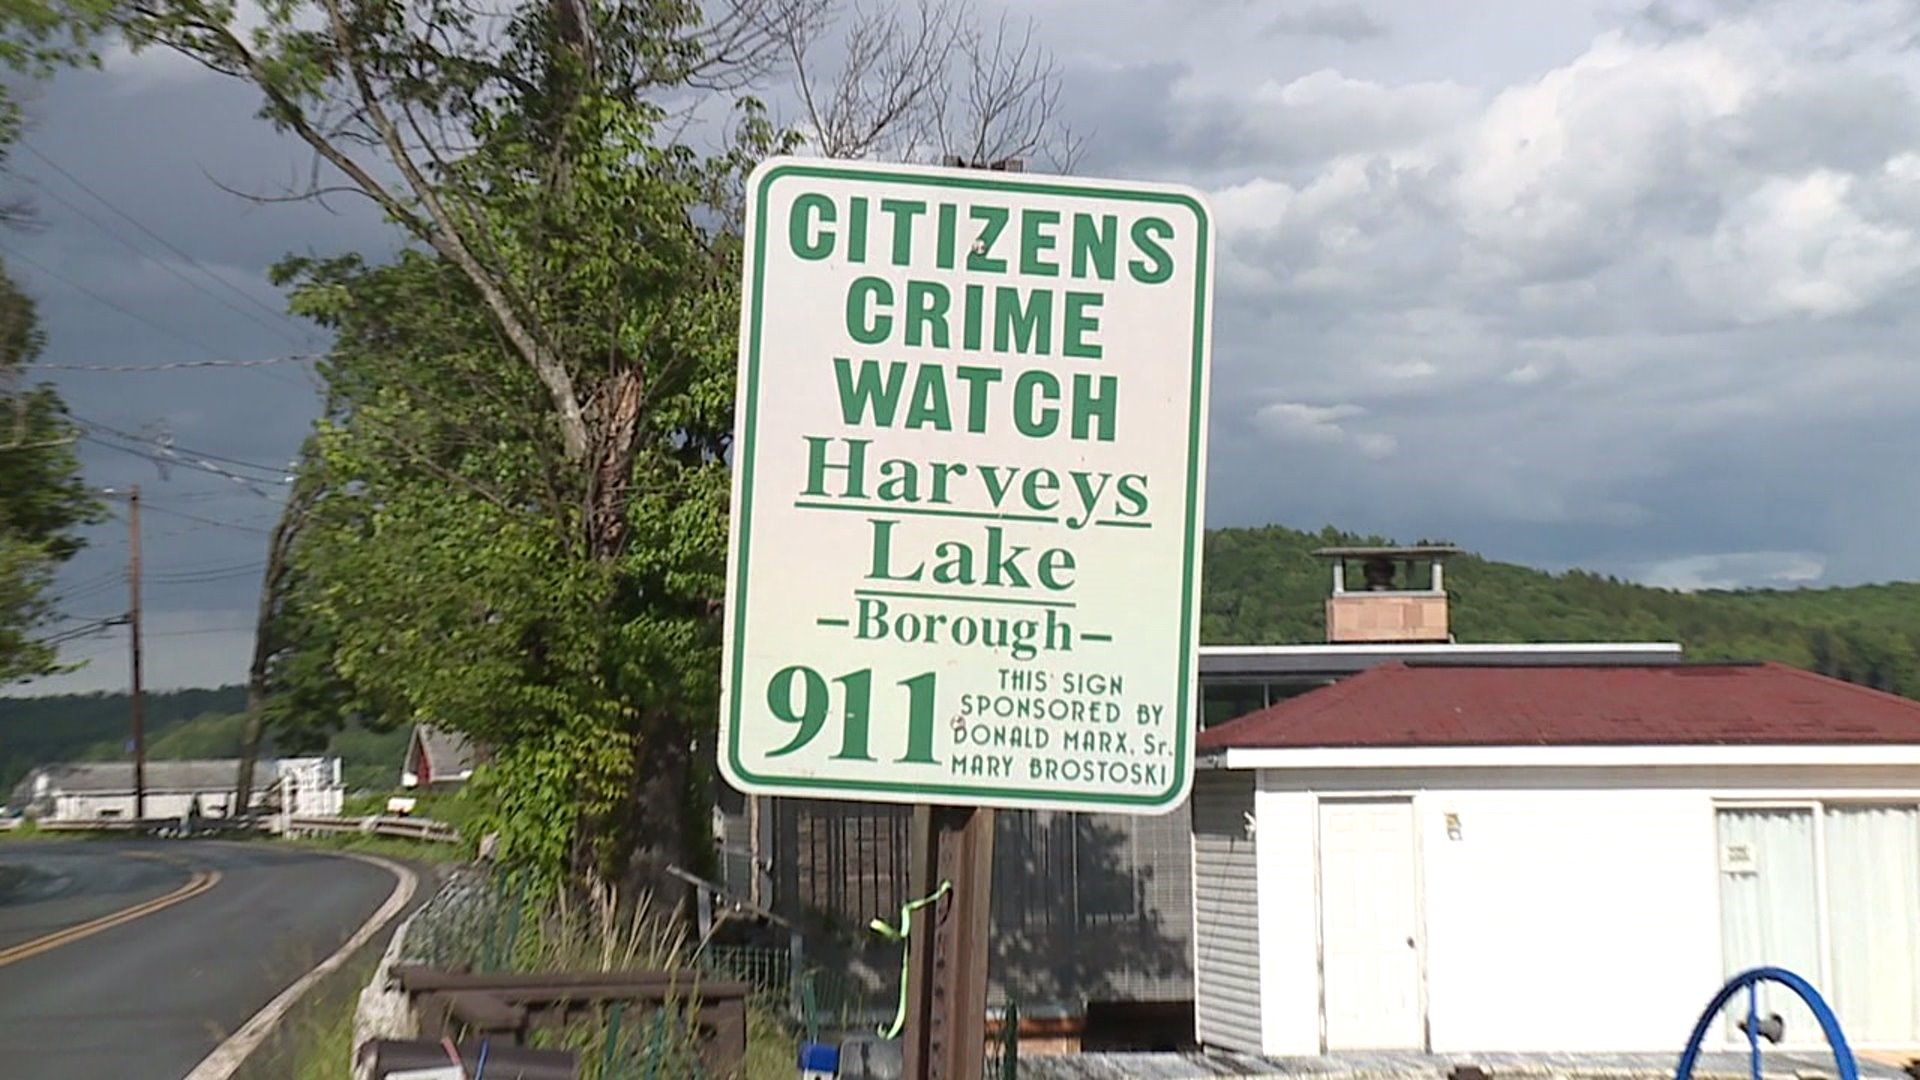 Harveys Lake Police Chief to Residents After Thieves Get into Vehicles: Lock Your Doors